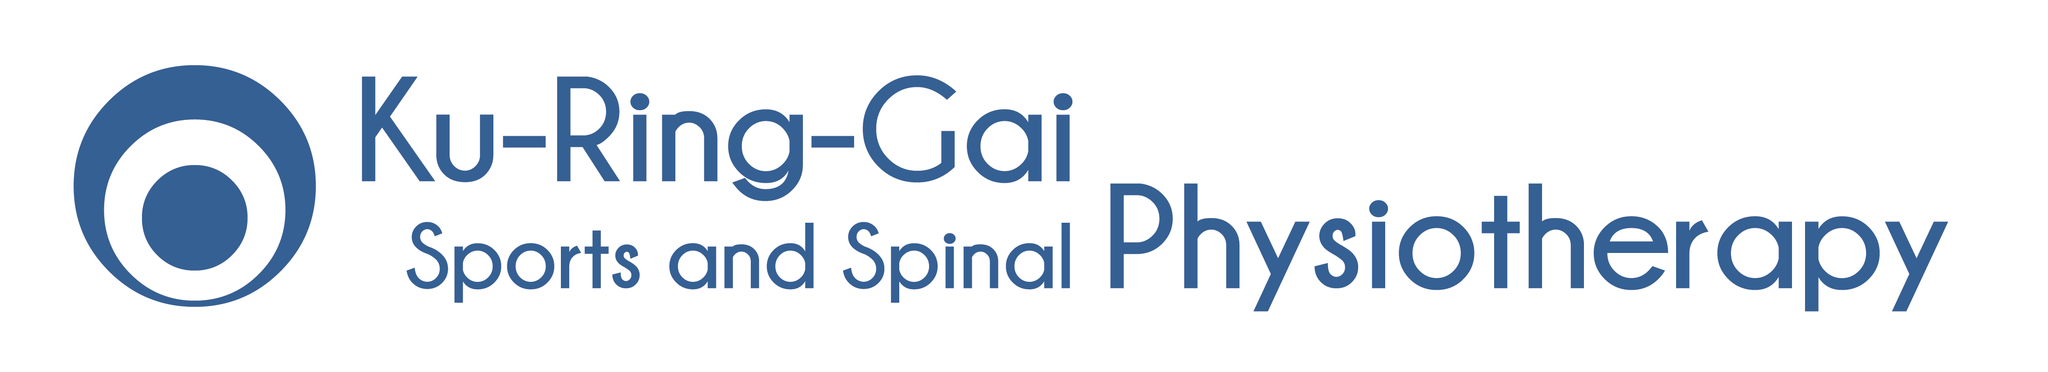 Ku-Ring-Gai Sports and Spinal Physiotherapy is The North Shore&#39;s provider of optimal sports treatment  